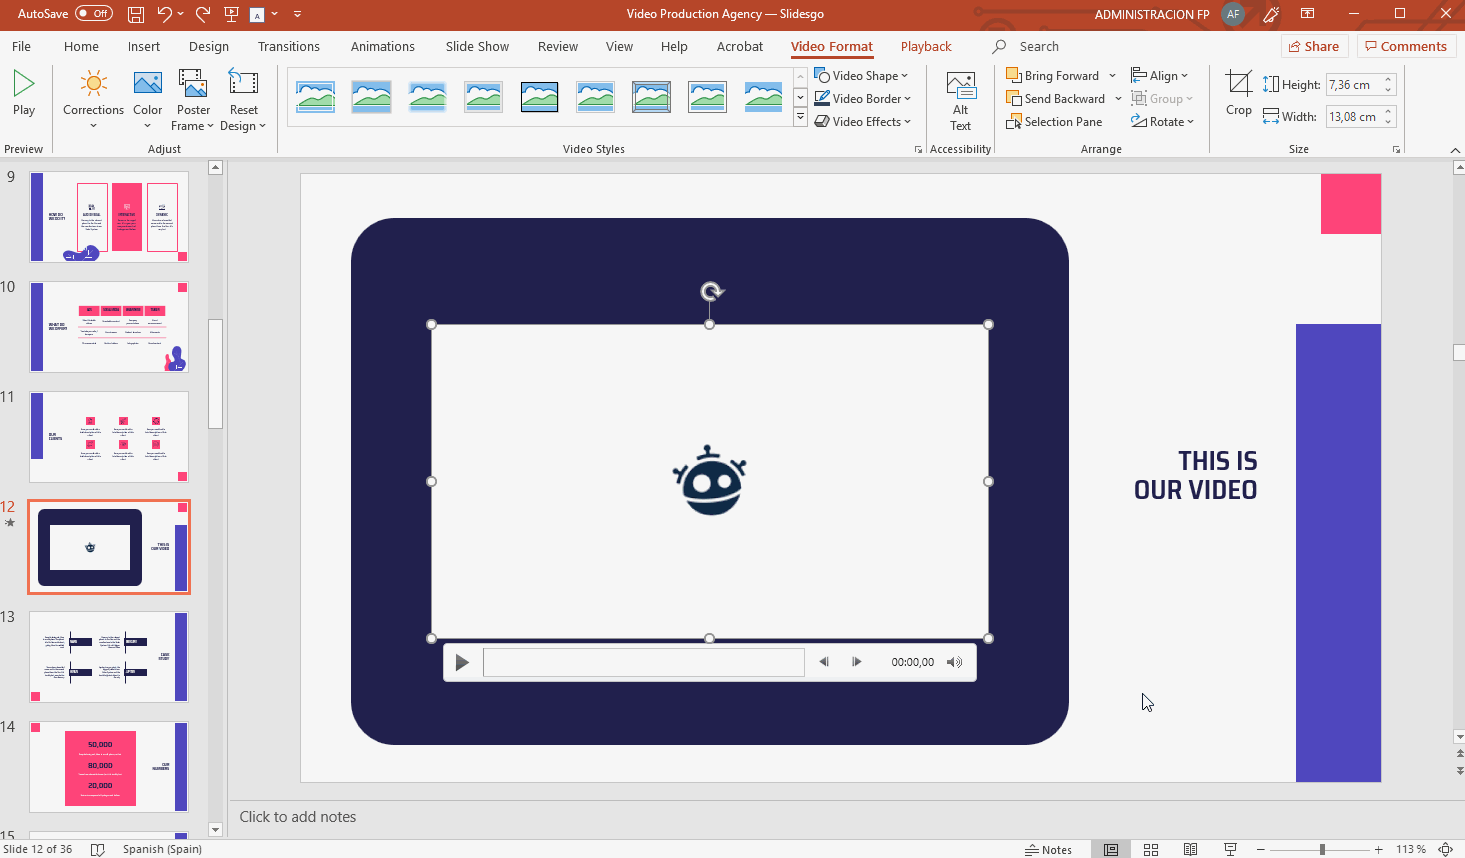 Entering alternative text for videos in PowerPoint